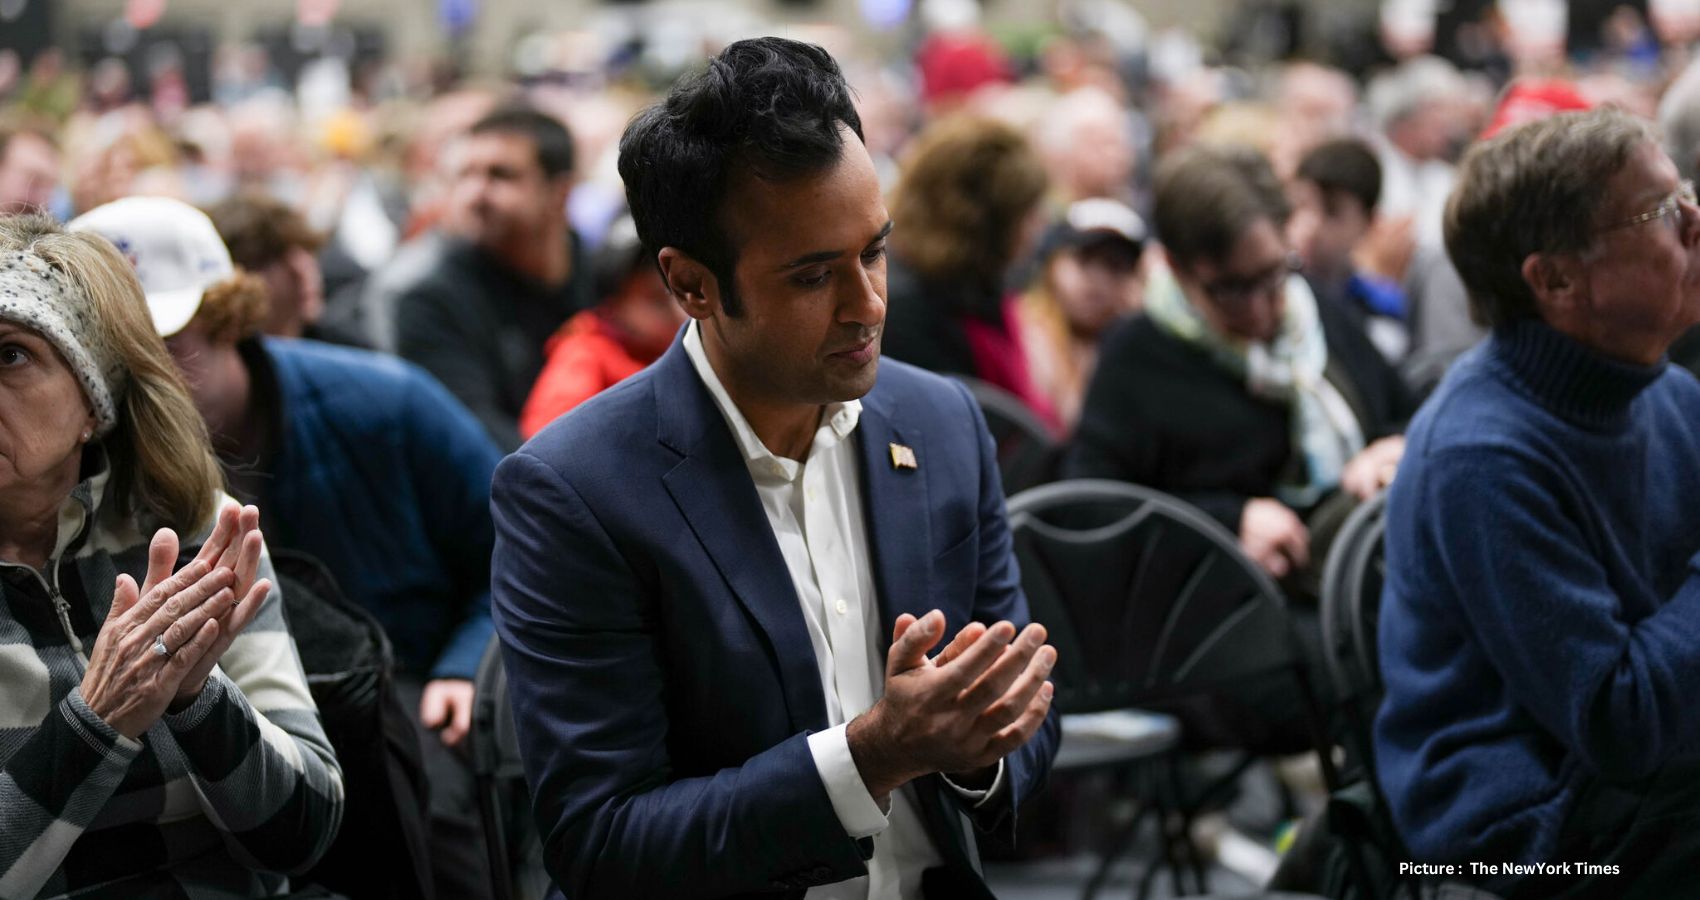 Entrepreneur Vivek Ramaswamy Withdraws from Republican Presidential Race, Throws Support Behind Trump